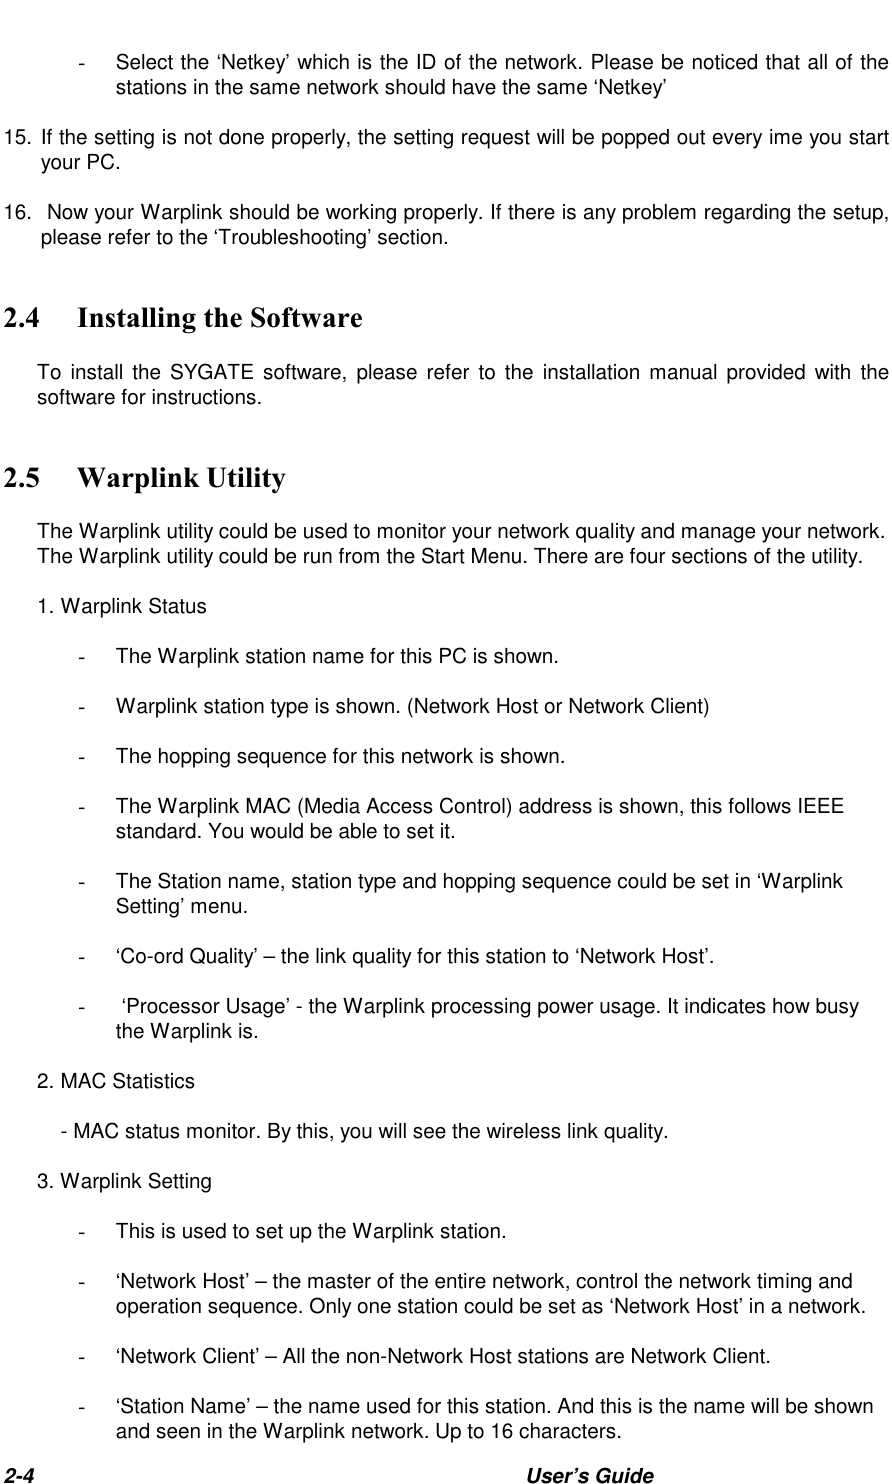 2-4 User’s Guide  Select the ‘Netkey’ which is the ID of the network. Please be noticed that all of thestations in the same network should have the same ‘Netkey’15.  If the setting is not done properly, the setting request will be popped out every ime you startyour PC.16.   Now your Warplink should be working properly. If there is any problem regarding the setup,please refer to the ‘Troubleshooting’ section.&amp; &quot;#!To install the SYGATE software, please refer to the installation manual provided with thesoftware for instructions.&apos; (The Warplink utility could be used to monitor your network quality and manage your network.The Warplink utility could be run from the Start Menu. There are four sections of the utility.1. Warplink Status  The Warplink station name for this PC is shown.  Warplink station type is shown. (Network Host or Network Client)  The hopping sequence for this network is shown.  The Warplink MAC (Media Access Control) address is shown, this follows IEEEstandard. You would be able to set it.  The Station name, station type and hopping sequence could be set in ‘WarplinkSetting’ menu.  ‘Co-ord Quality’ – the link quality for this station to ‘Network Host’.   ‘Processor Usage’ - the Warplink processing power usage. It indicates how busythe Warplink is.2. MAC Statistics- MAC status monitor. By this, you will see the wireless link quality.3. Warplink Setting  This is used to set up the Warplink station.  ‘Network Host’ – the master of the entire network, control the network timing andoperation sequence. Only one station could be set as ‘Network Host’ in a network.  ‘Network Client’ – All the non-Network Host stations are Network Client.  ‘Station Name’ – the name used for this station. And this is the name will be shownand seen in the Warplink network. Up to 16 characters.